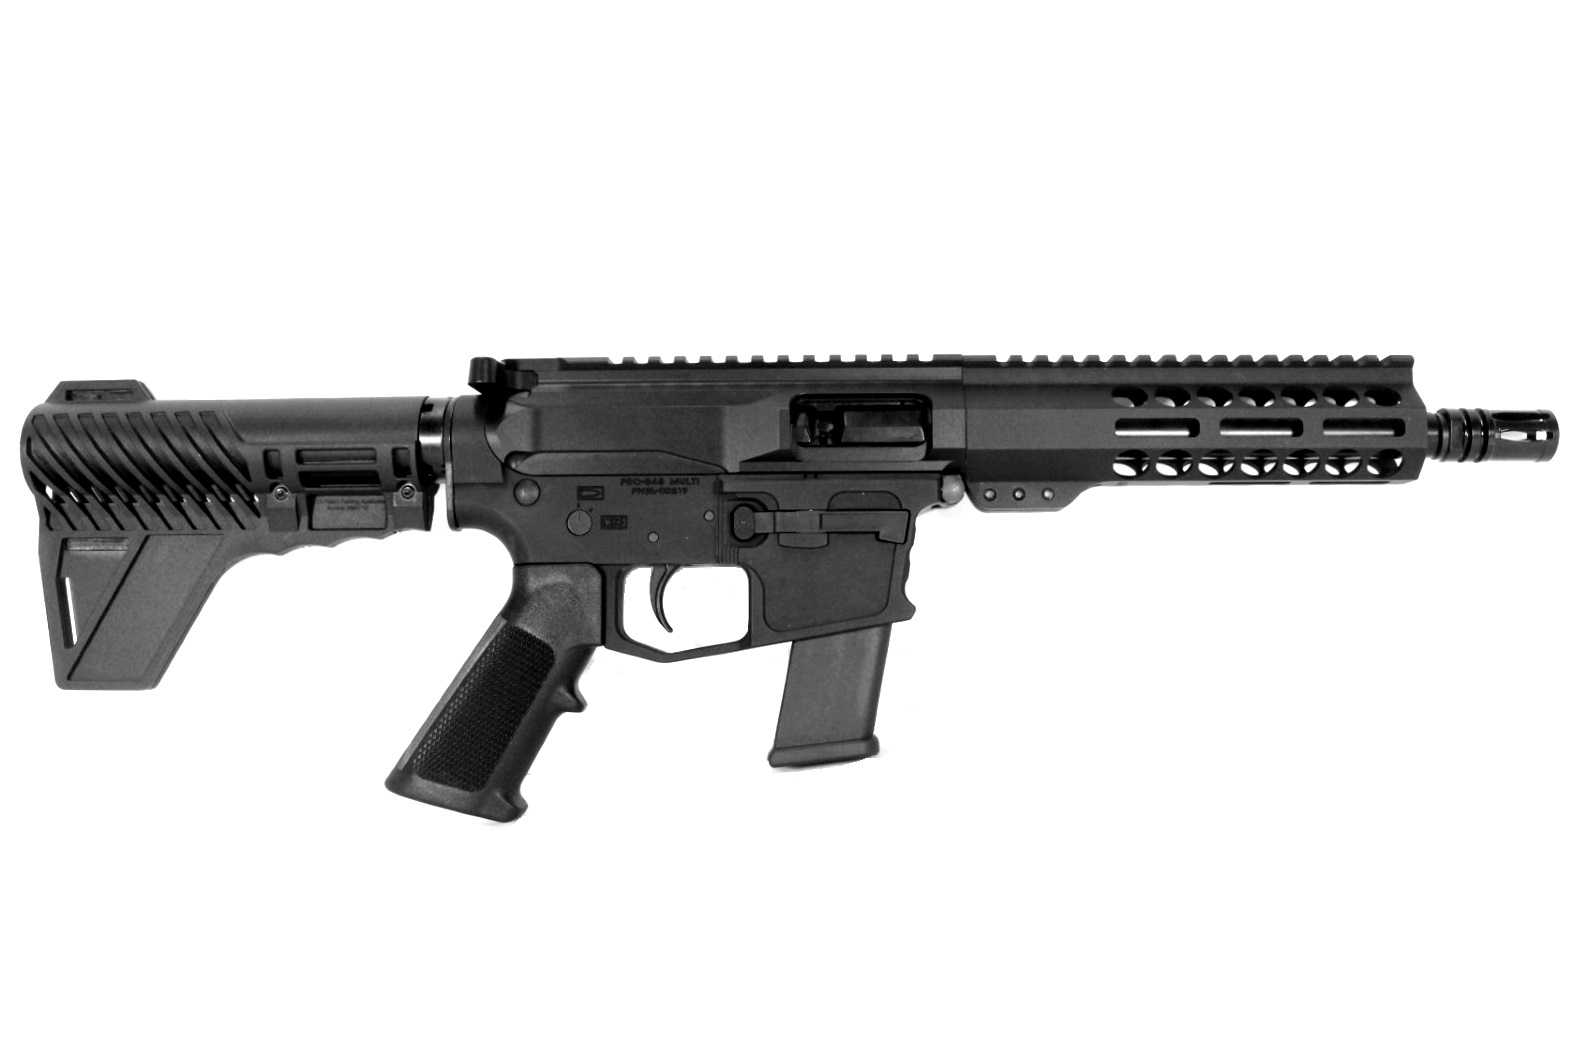 8.5 inch 10mm AR-15 Pistol - Made in the USA